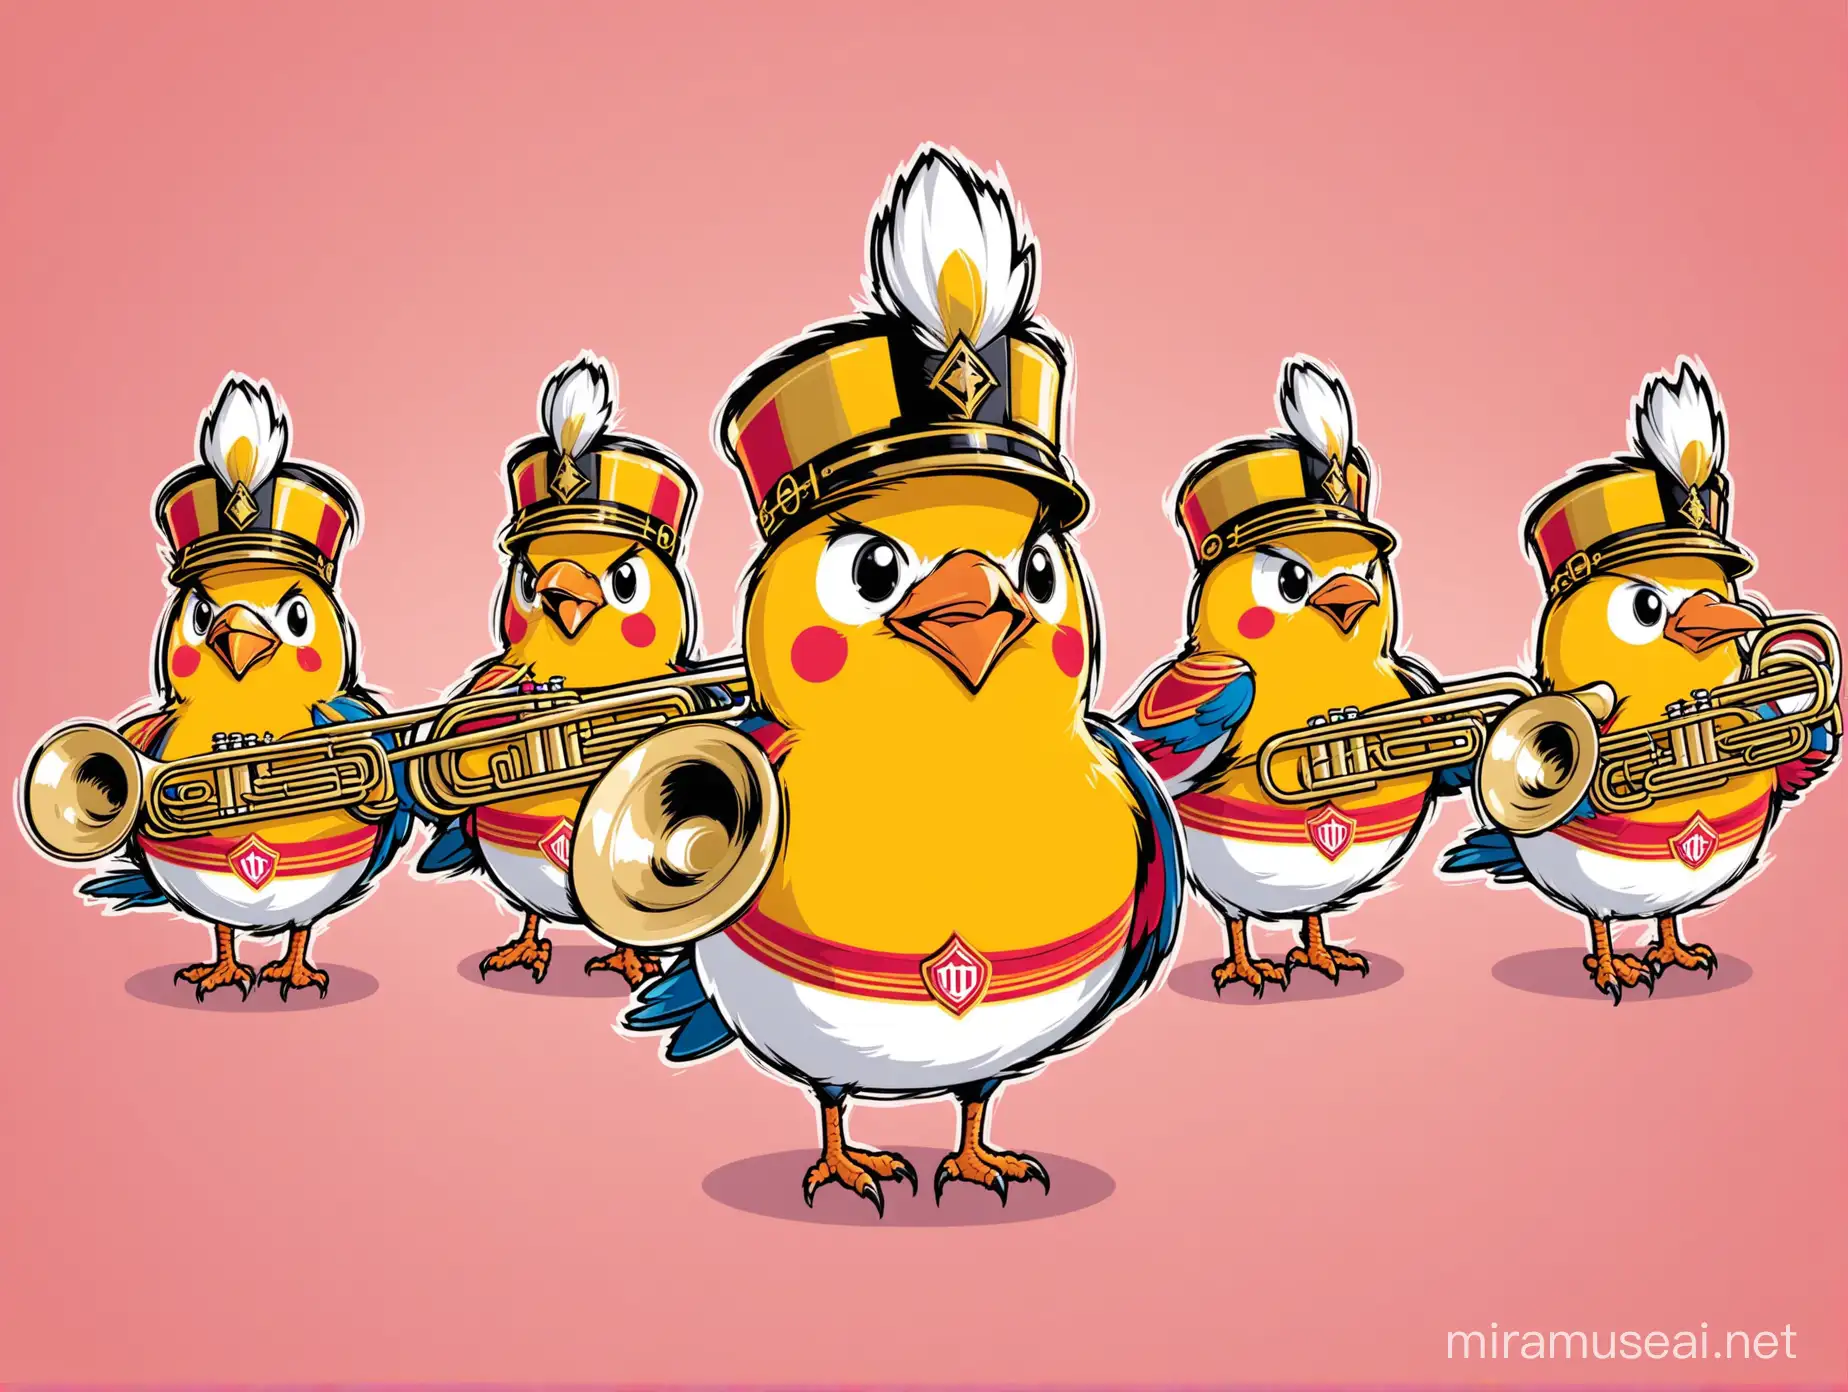 Colorful Bird Mascot Leading a Spirited Marching Band Parade